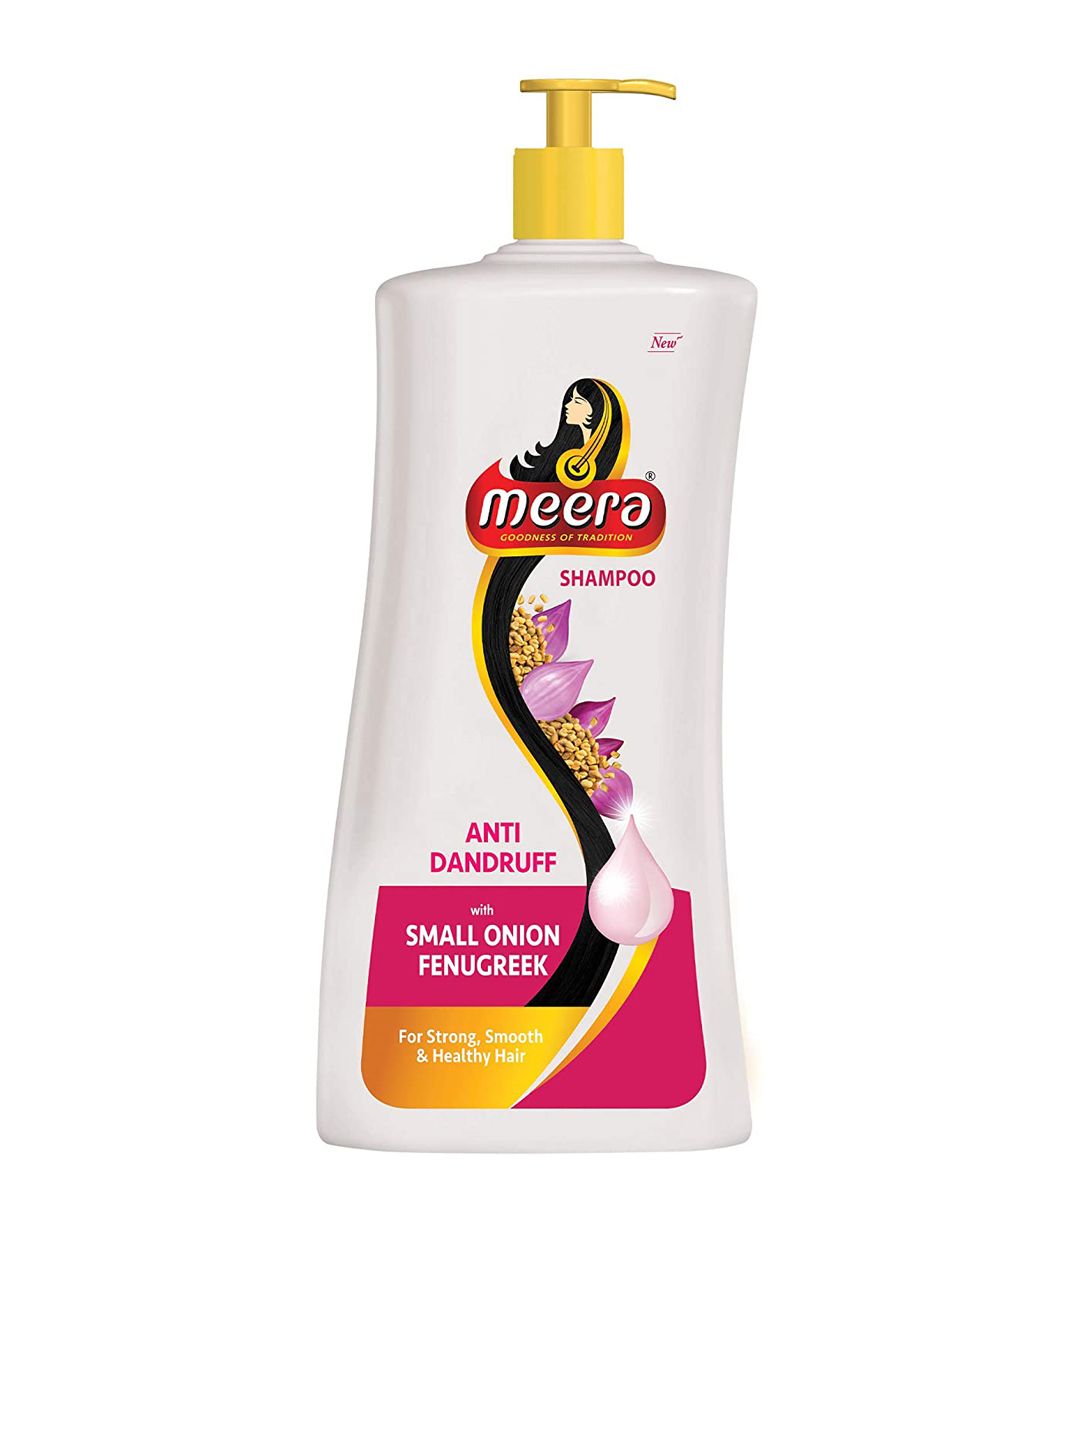 Meera GOODNESS OF TRADITION Anti-Dandruff Shampoo with Small Onion and Fenugreek 650 ml Price in India